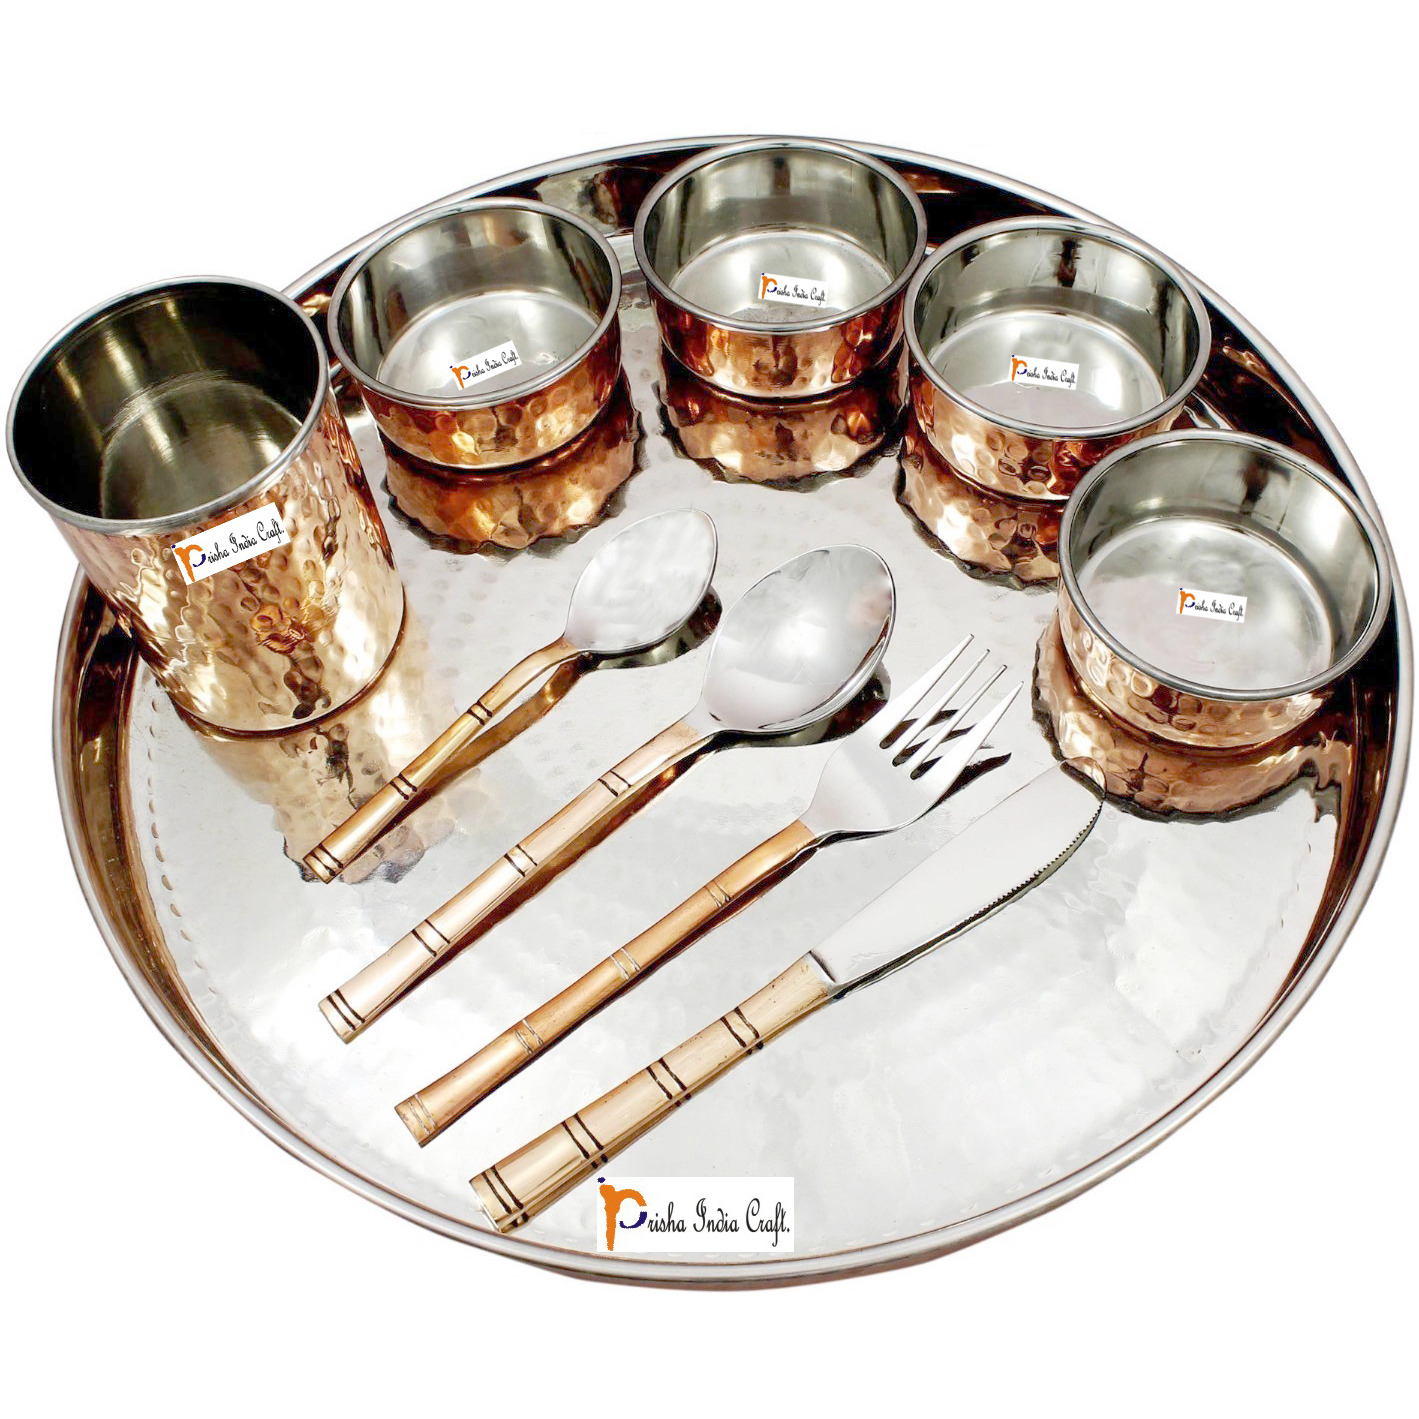 Prisha India Craft B. Set of 2 Dinnerware Traditional Stainless Steel Copper Dinner Set of Thali Plate, Bowls, Glass and Spoons, Dia 13  With 1 Embossed Stainless Steel Copper Pitcher Jug - Christmas Gift